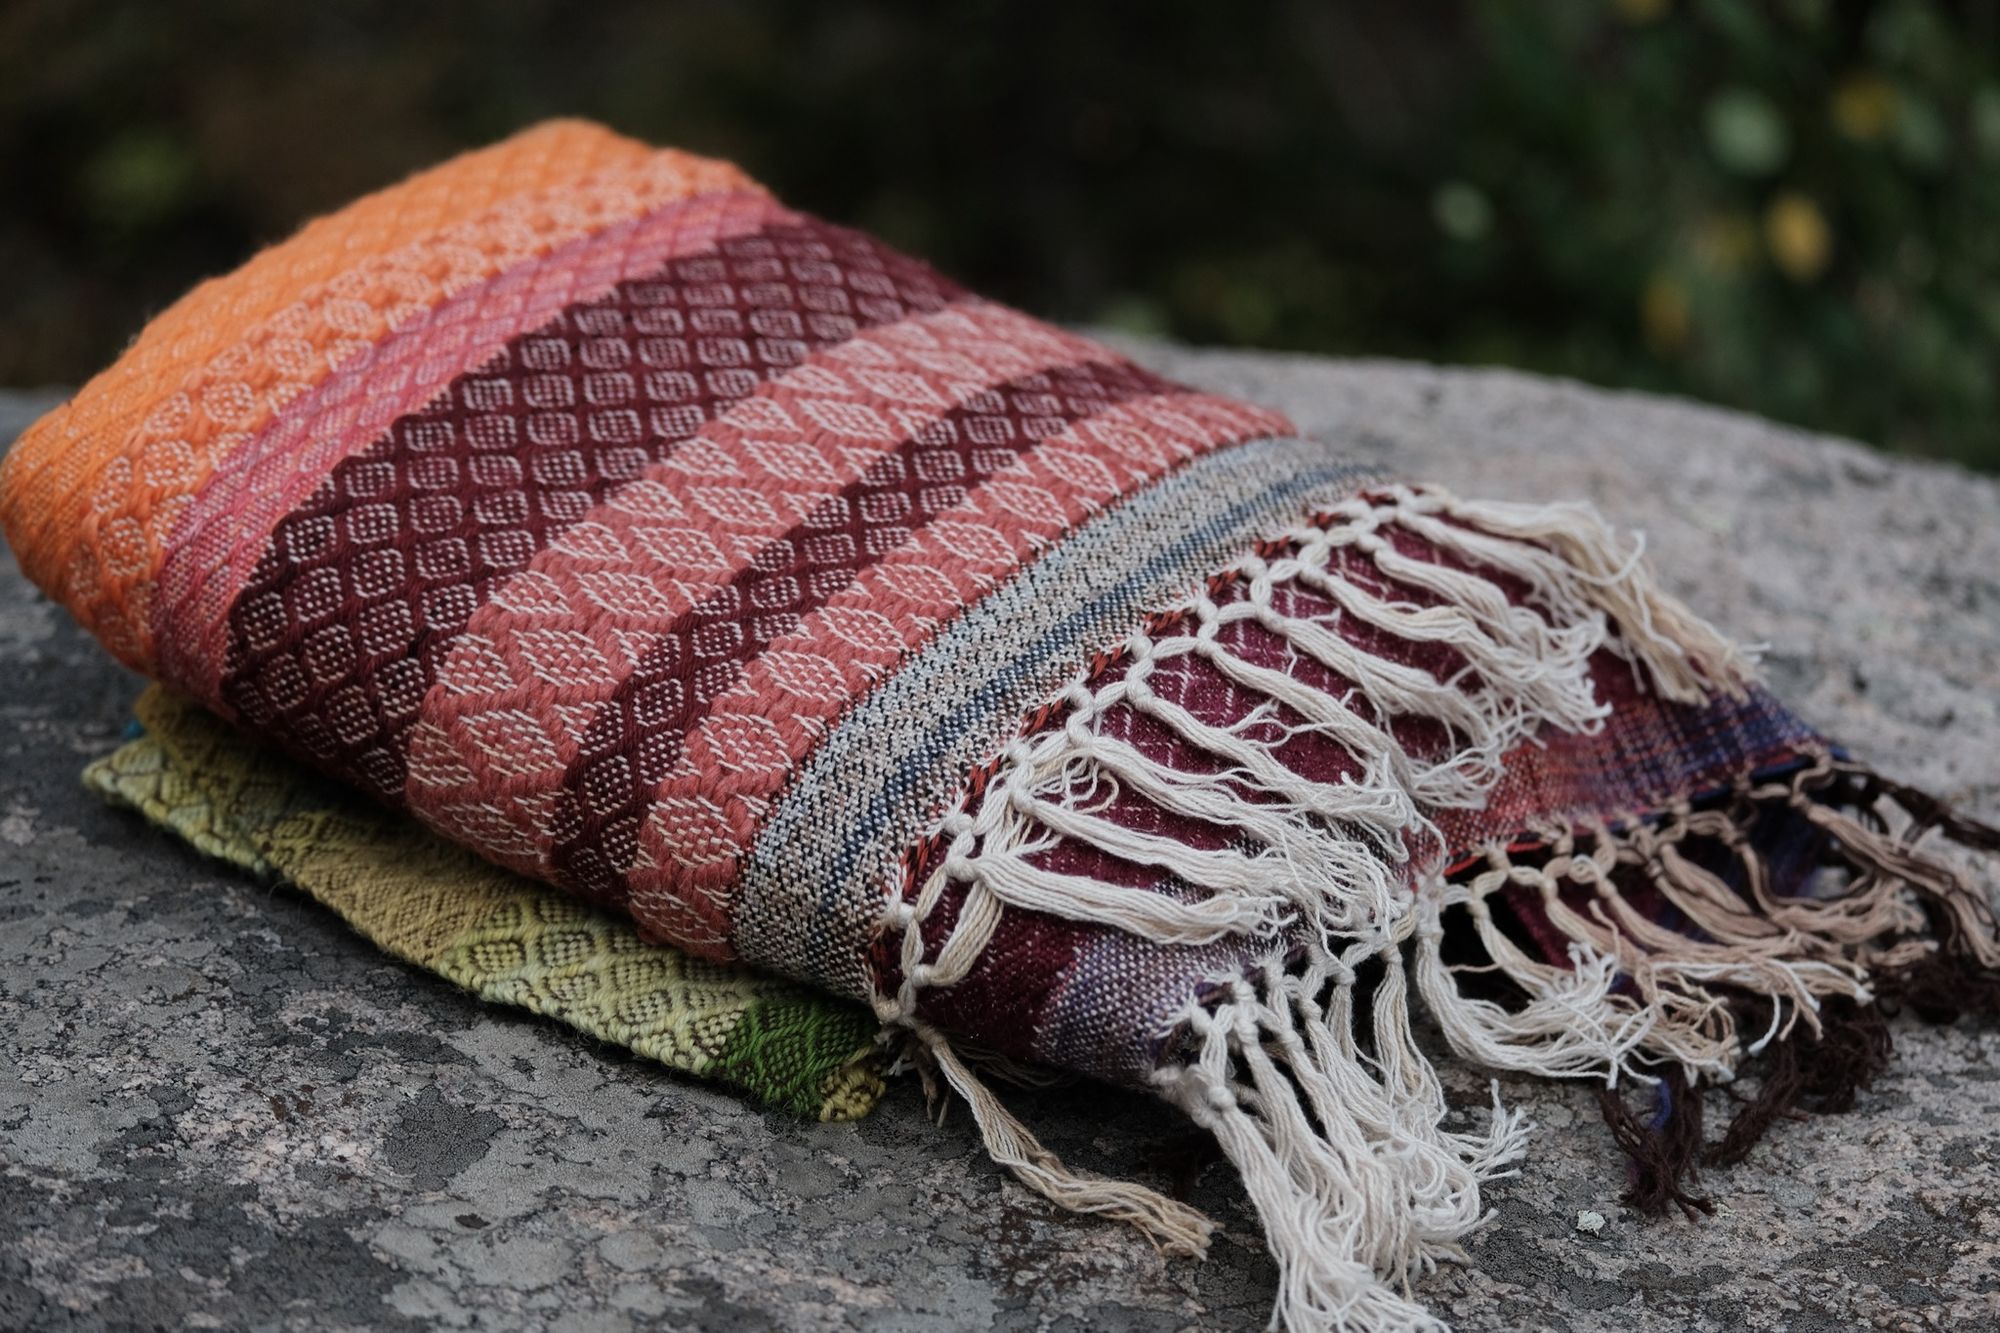 A handwoven rainbow striped blanket lays folded on a lichen covered rock in the forest